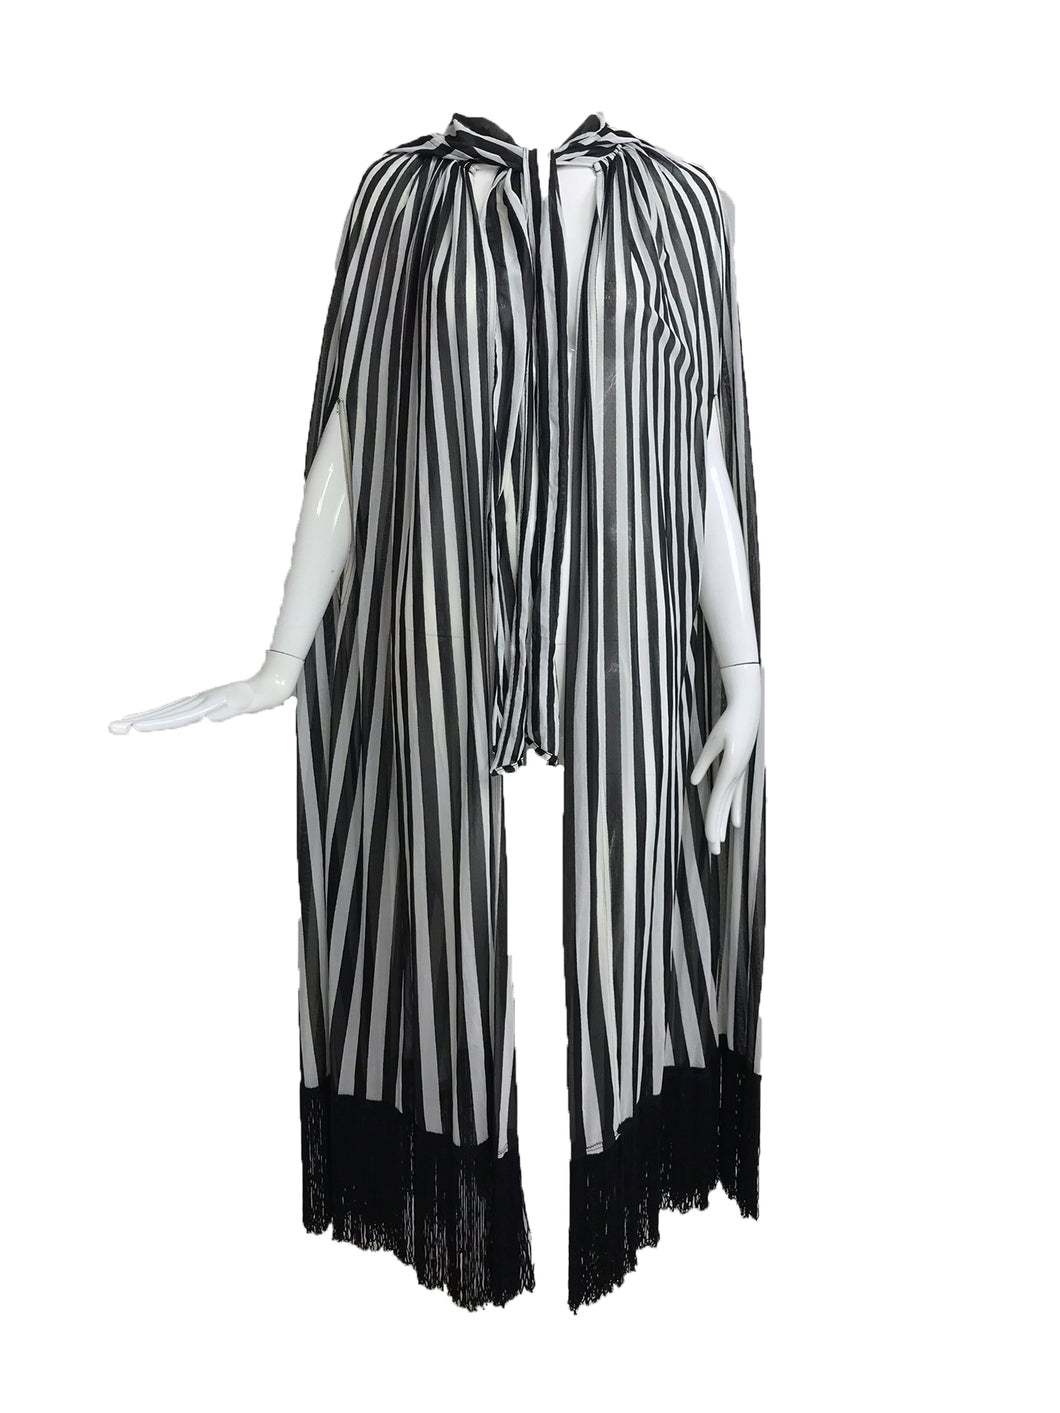 Vintage Gottex Black and White Stripe Hooded Cape with Fringe 1980s